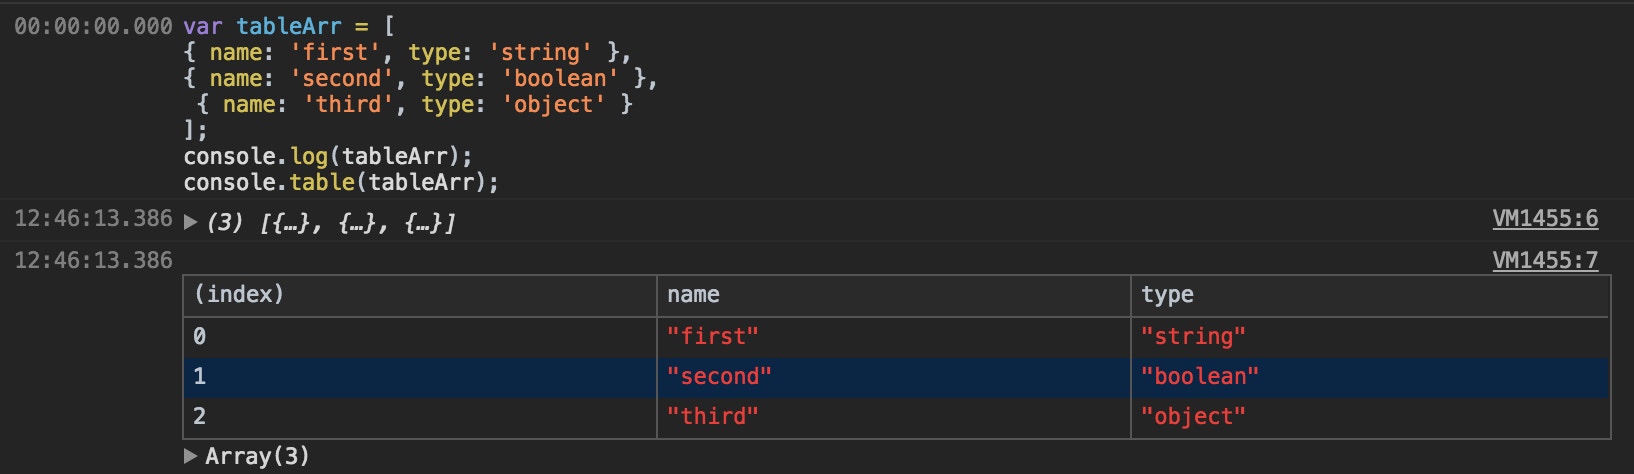 console.table.array example